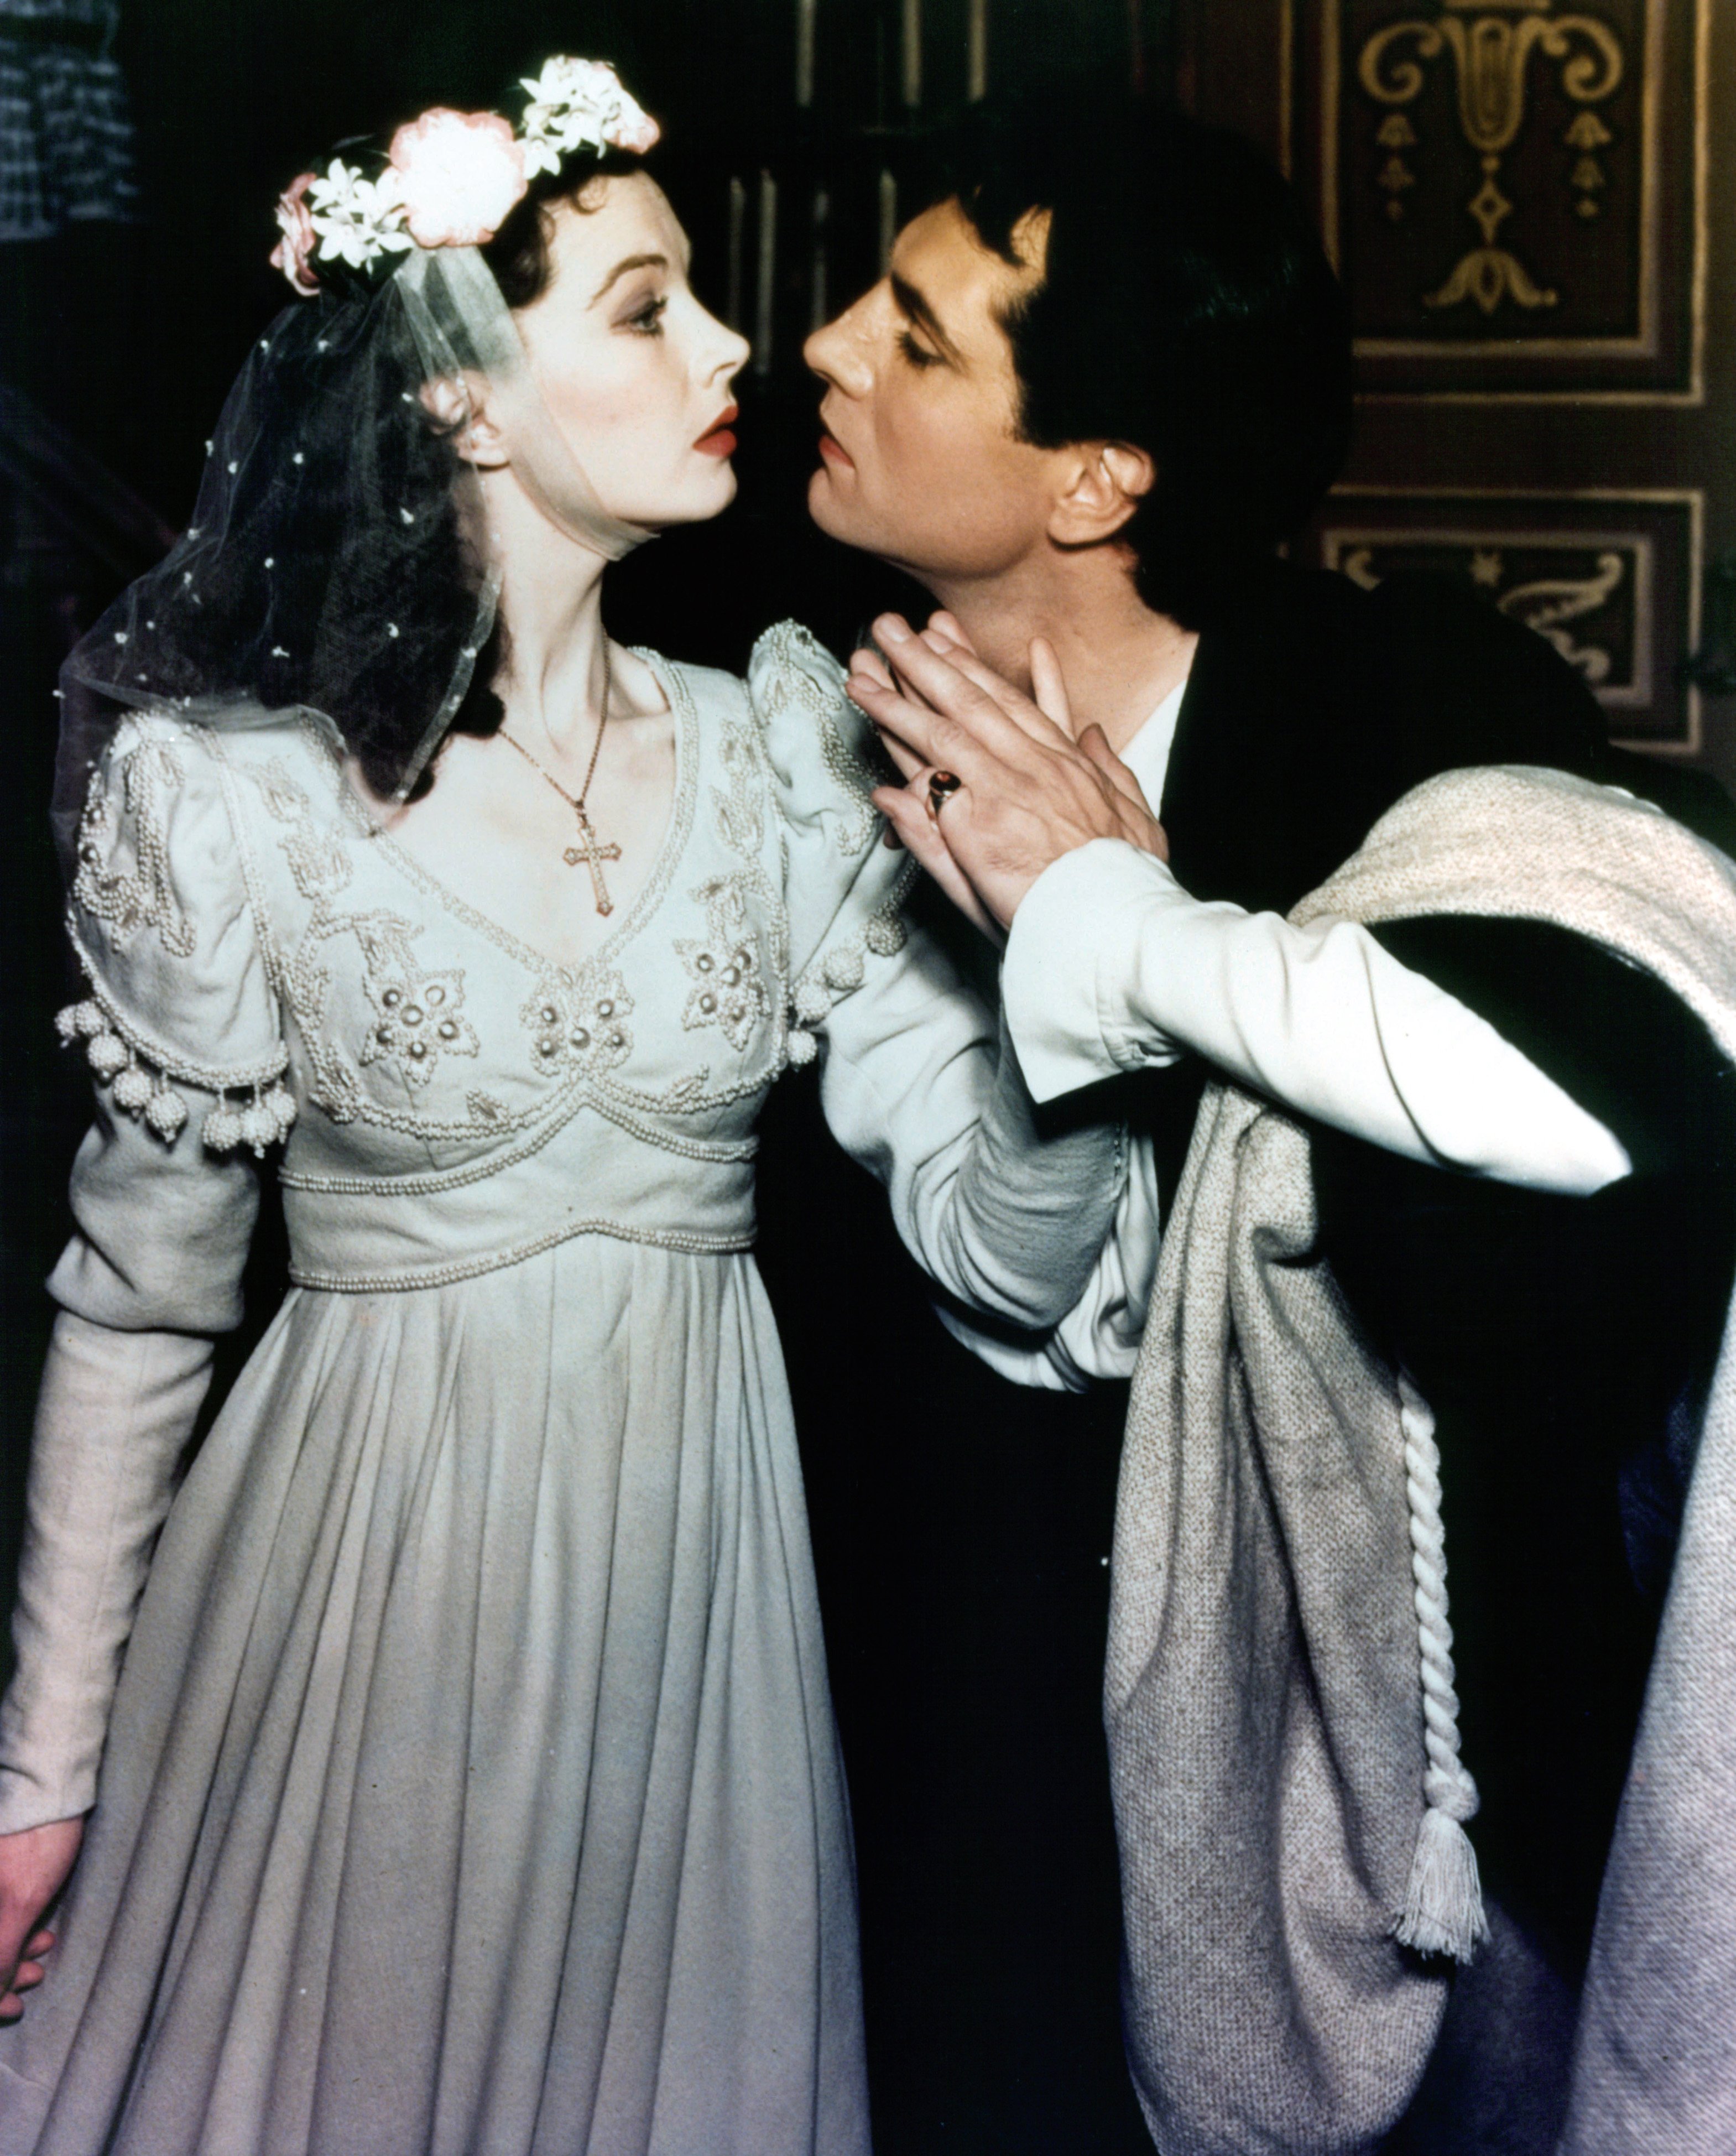 Pictured: Vivien Leigh about to kiss Laurence Olivier in a scene from a production of "Romeo and Juliet" in 1940 |  Photo: Getty Images